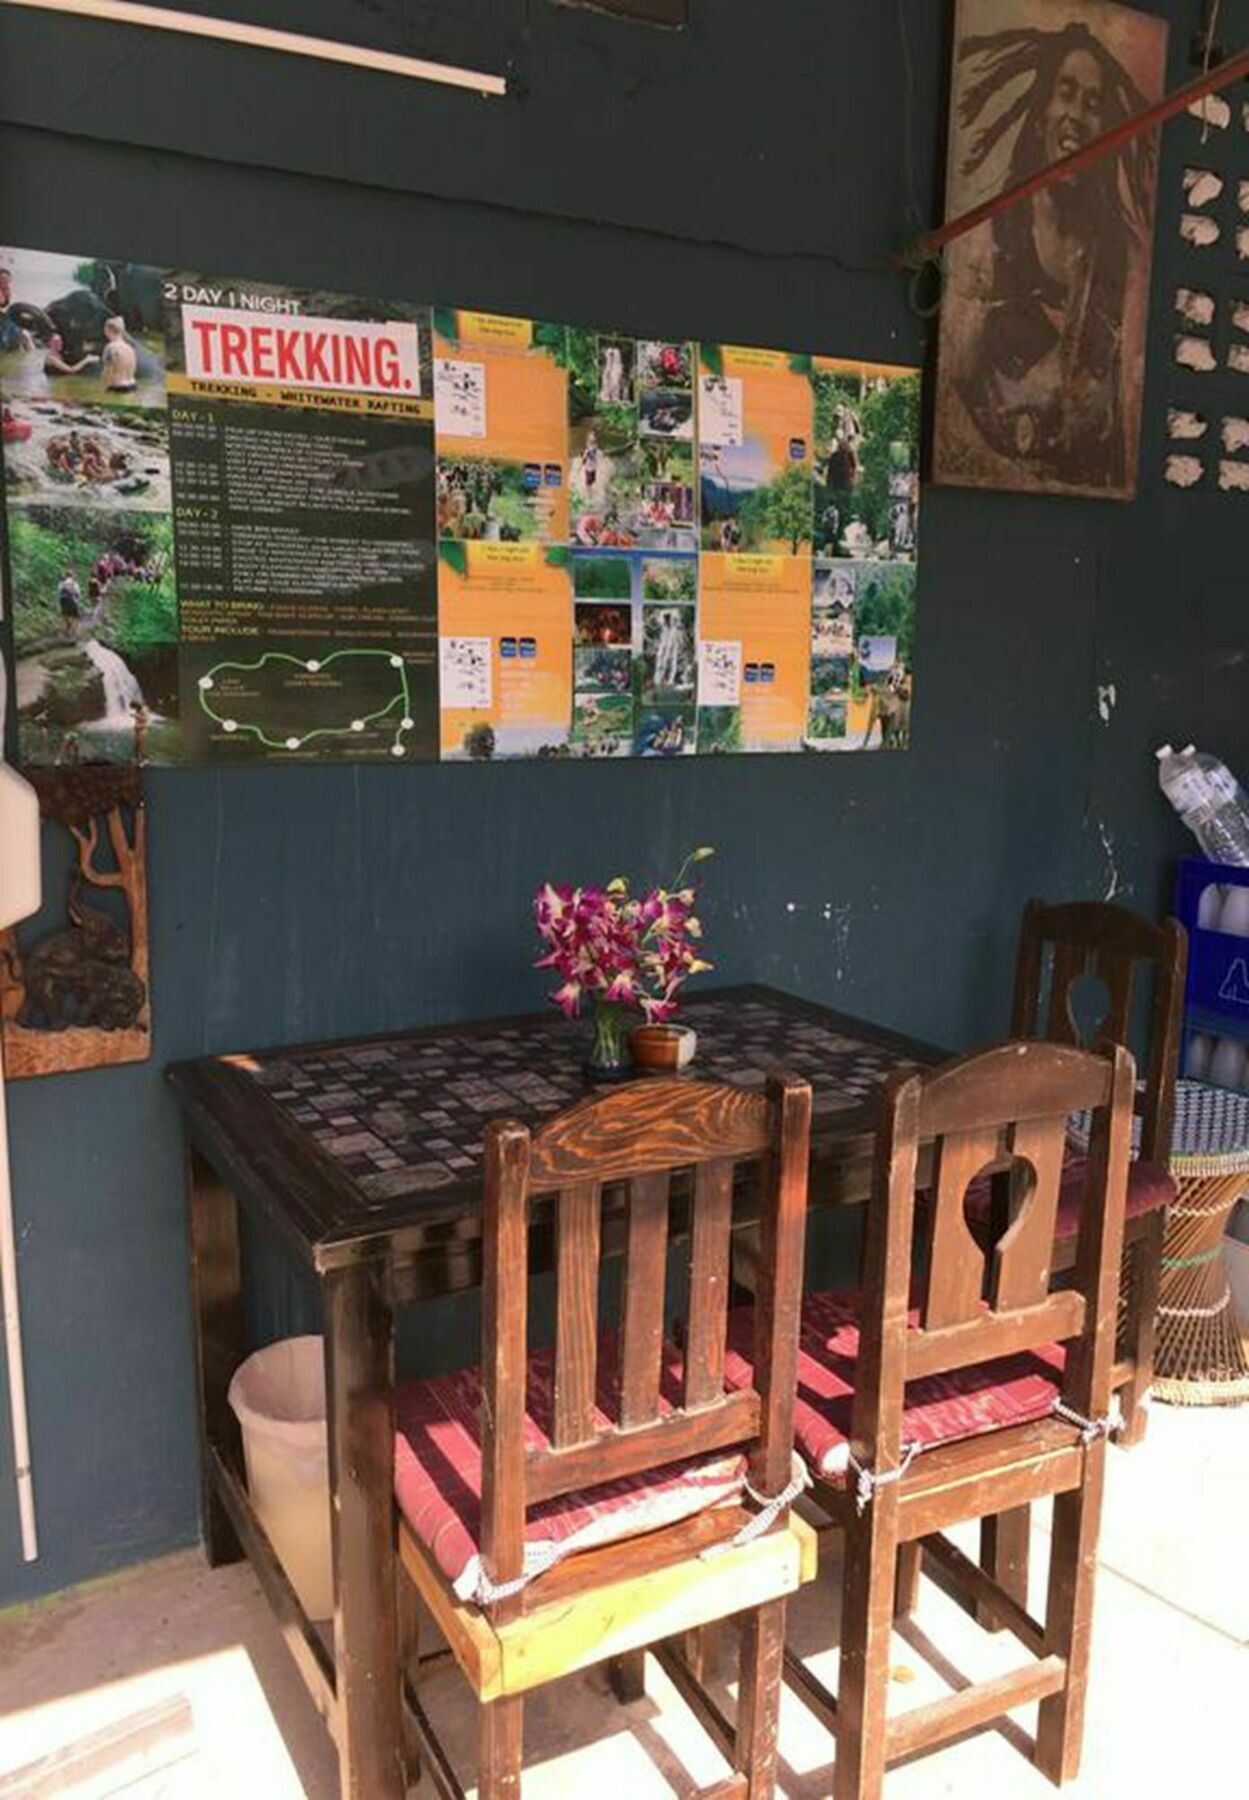 Tiger House Hostel (Adults Only) 清邁 外观 照片